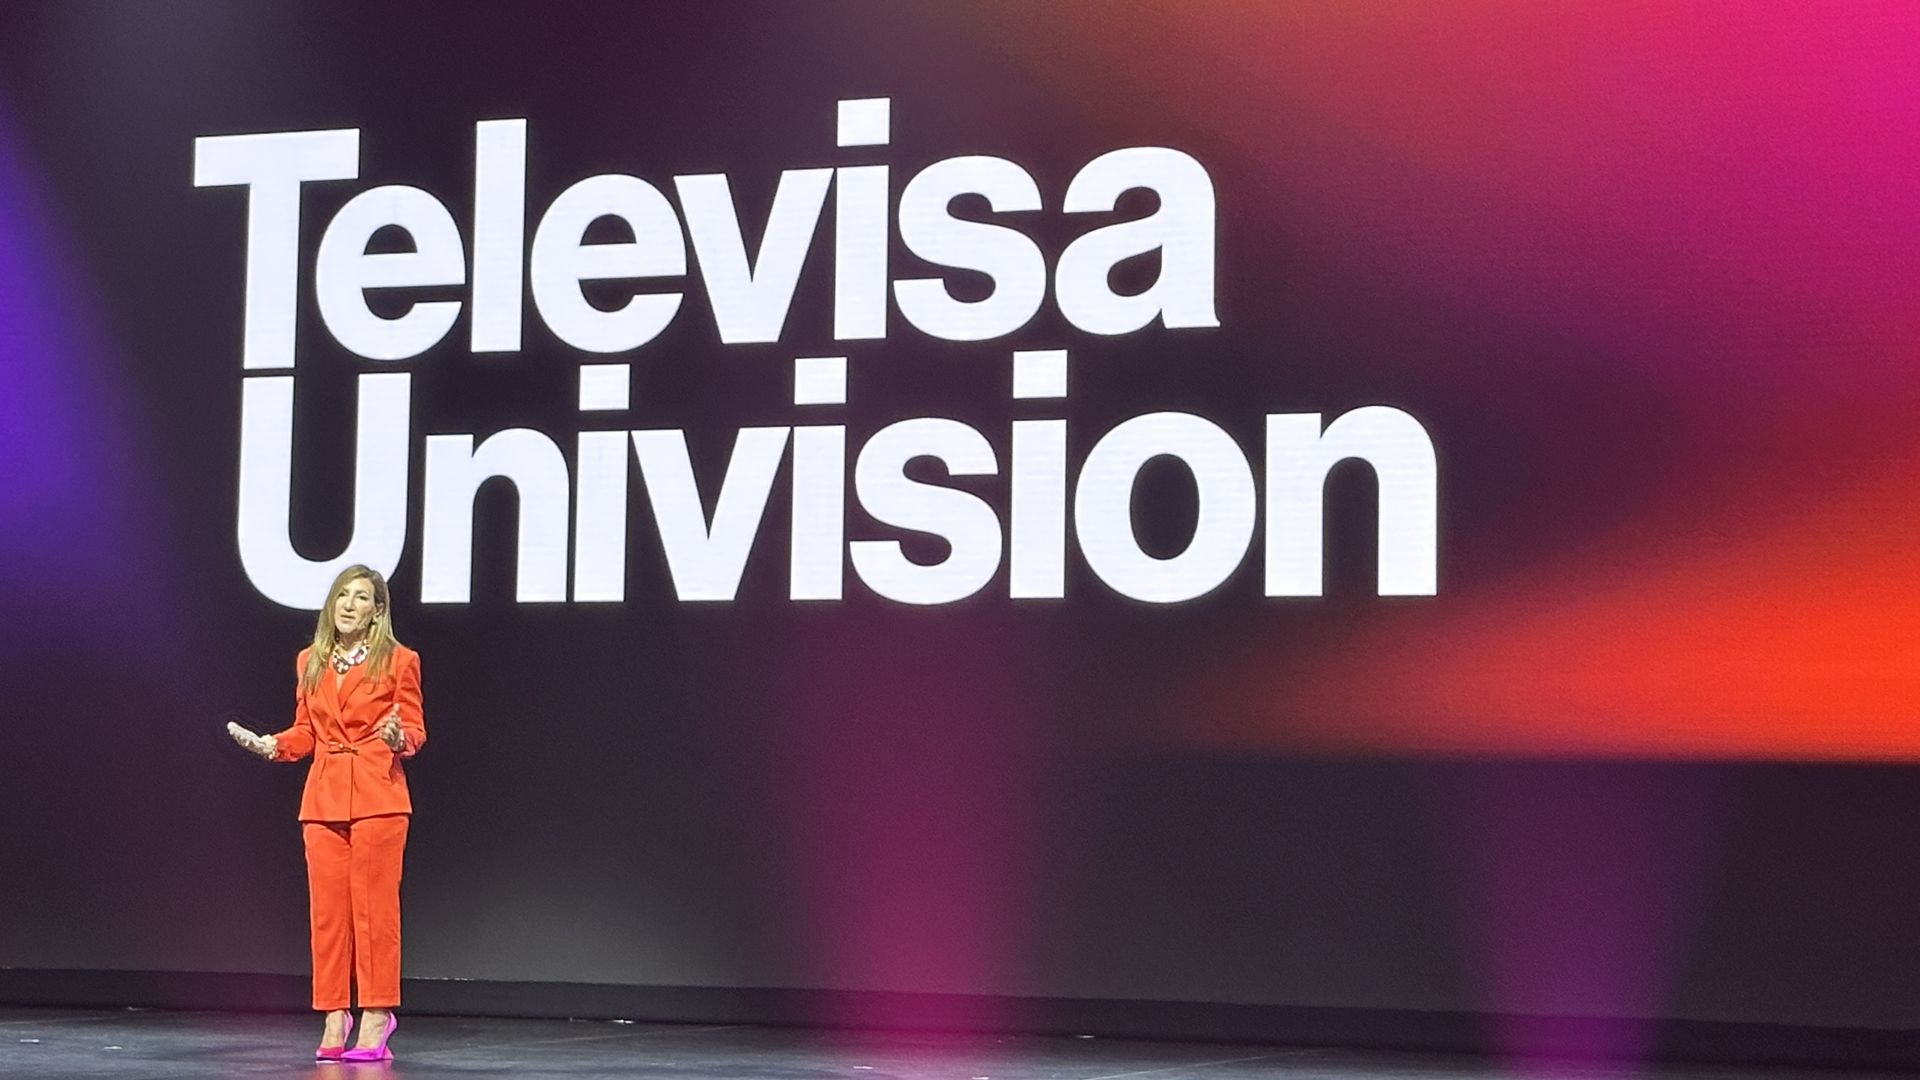 TelevisaUnivision's Donna Speciale in an orange pantsuit with pink high heels speaking in front of a screen that says "TelevisaUnivision"